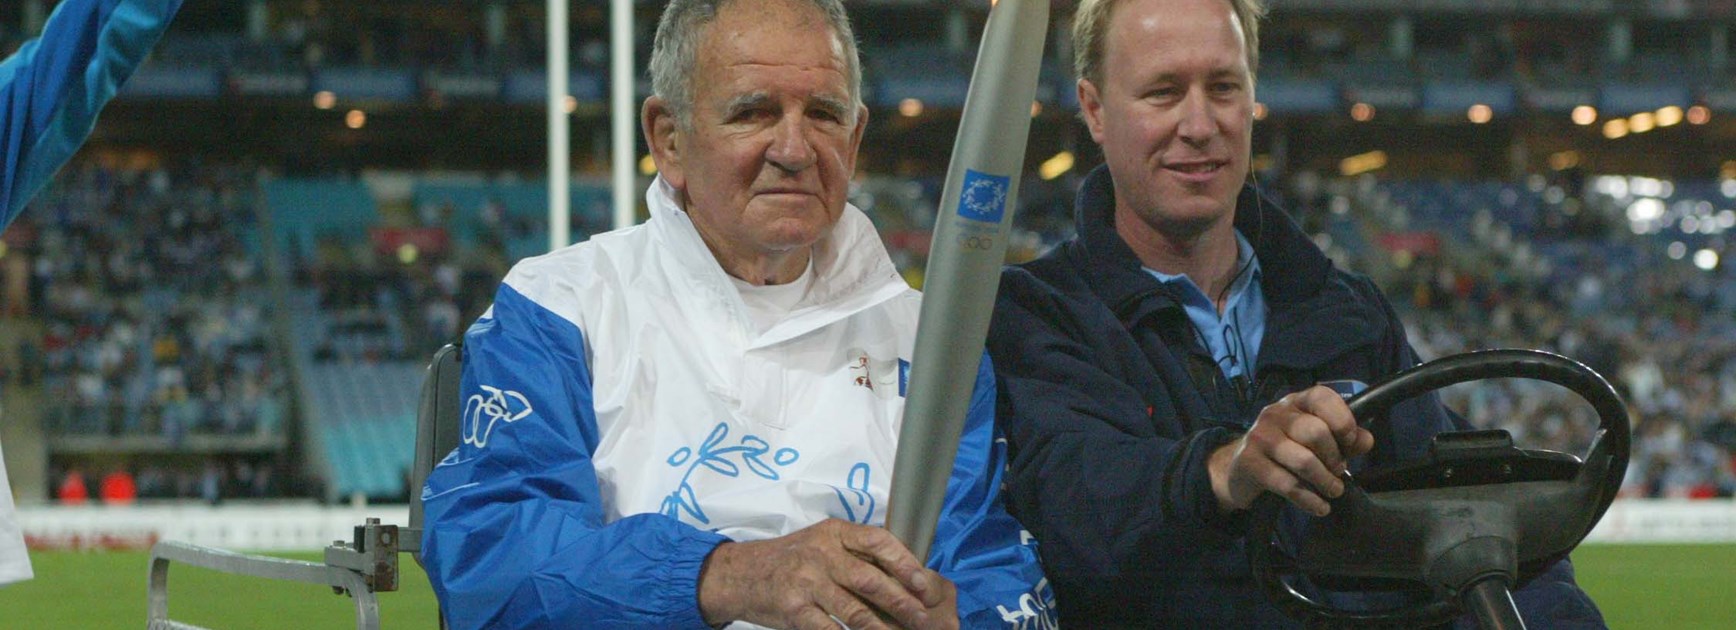 Jack Gibson with the Olympic torch in 2004.